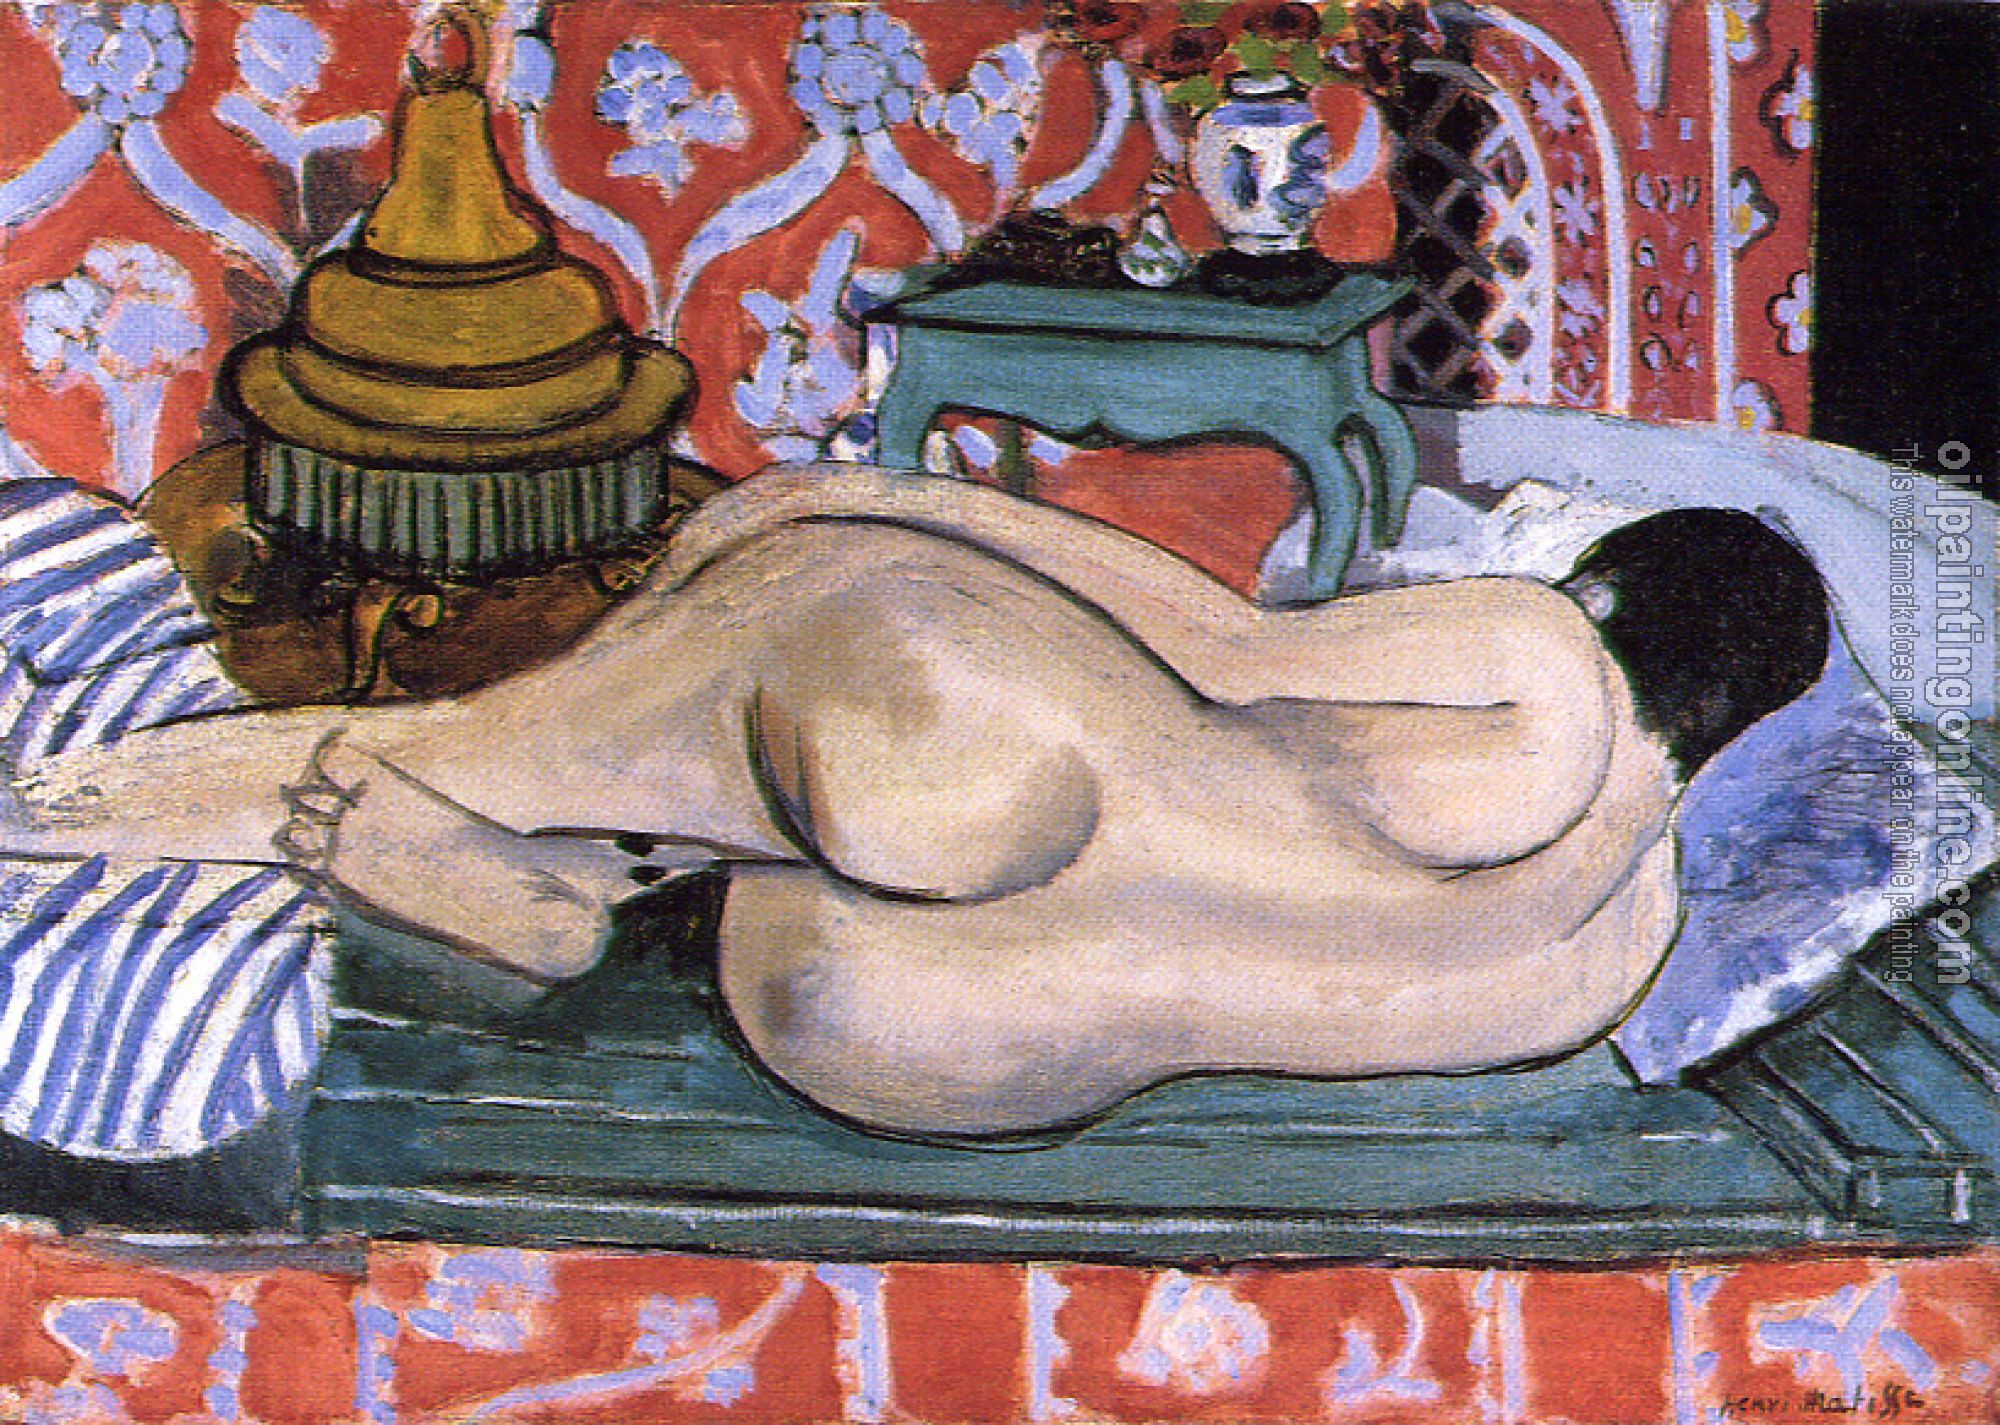 Matisse, Henri Emile Benoit - reclining nude seen from the back